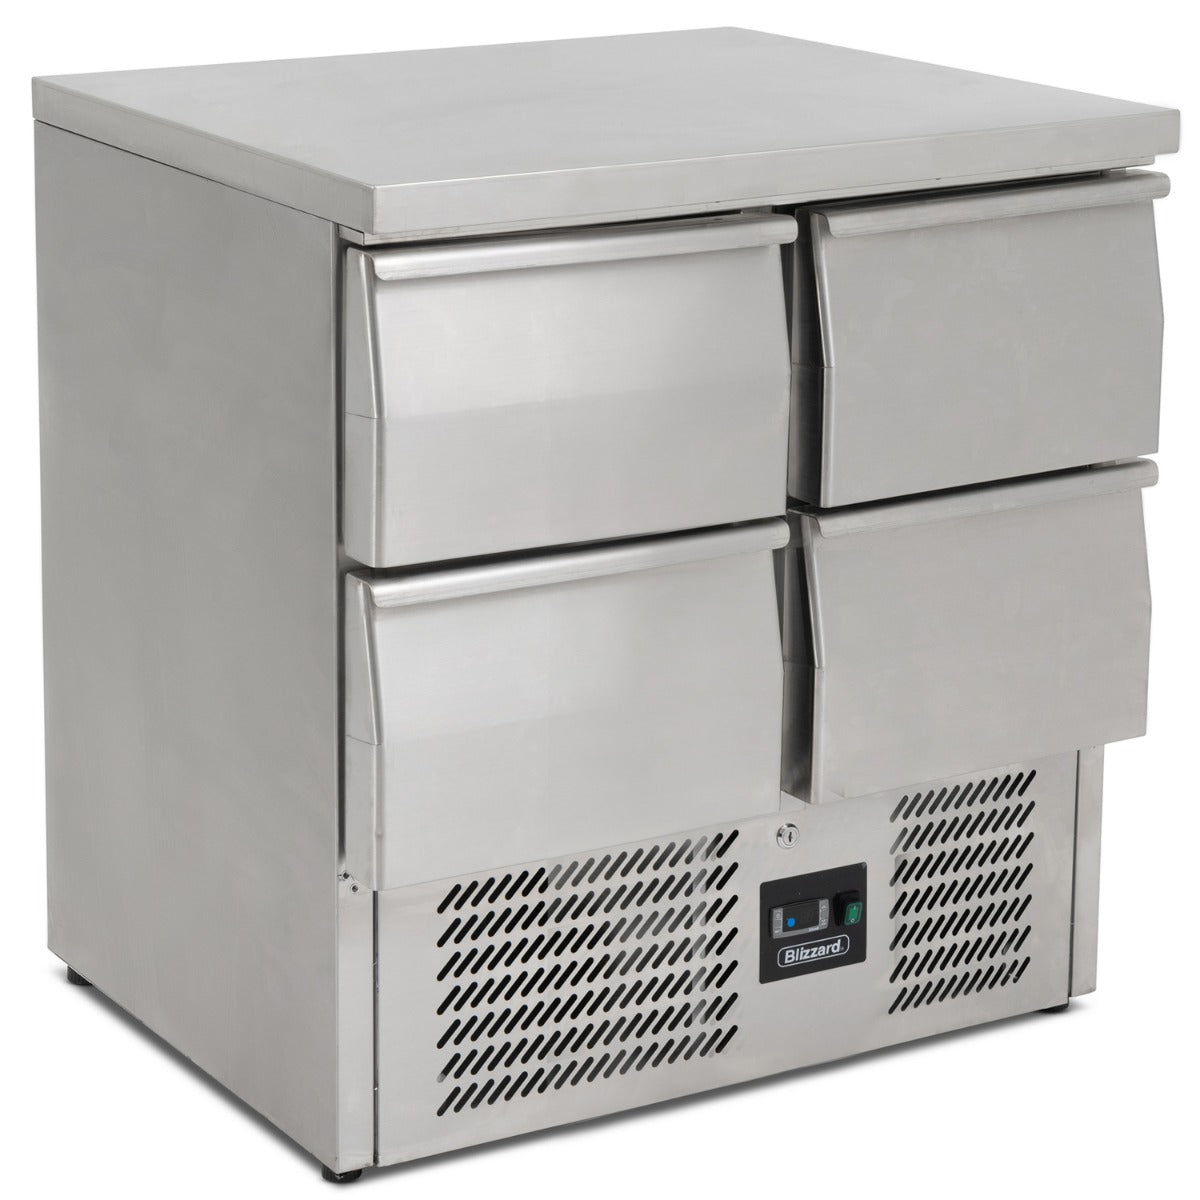 Blizzard 4 Drawer Compact Gastronorm Counter 240L